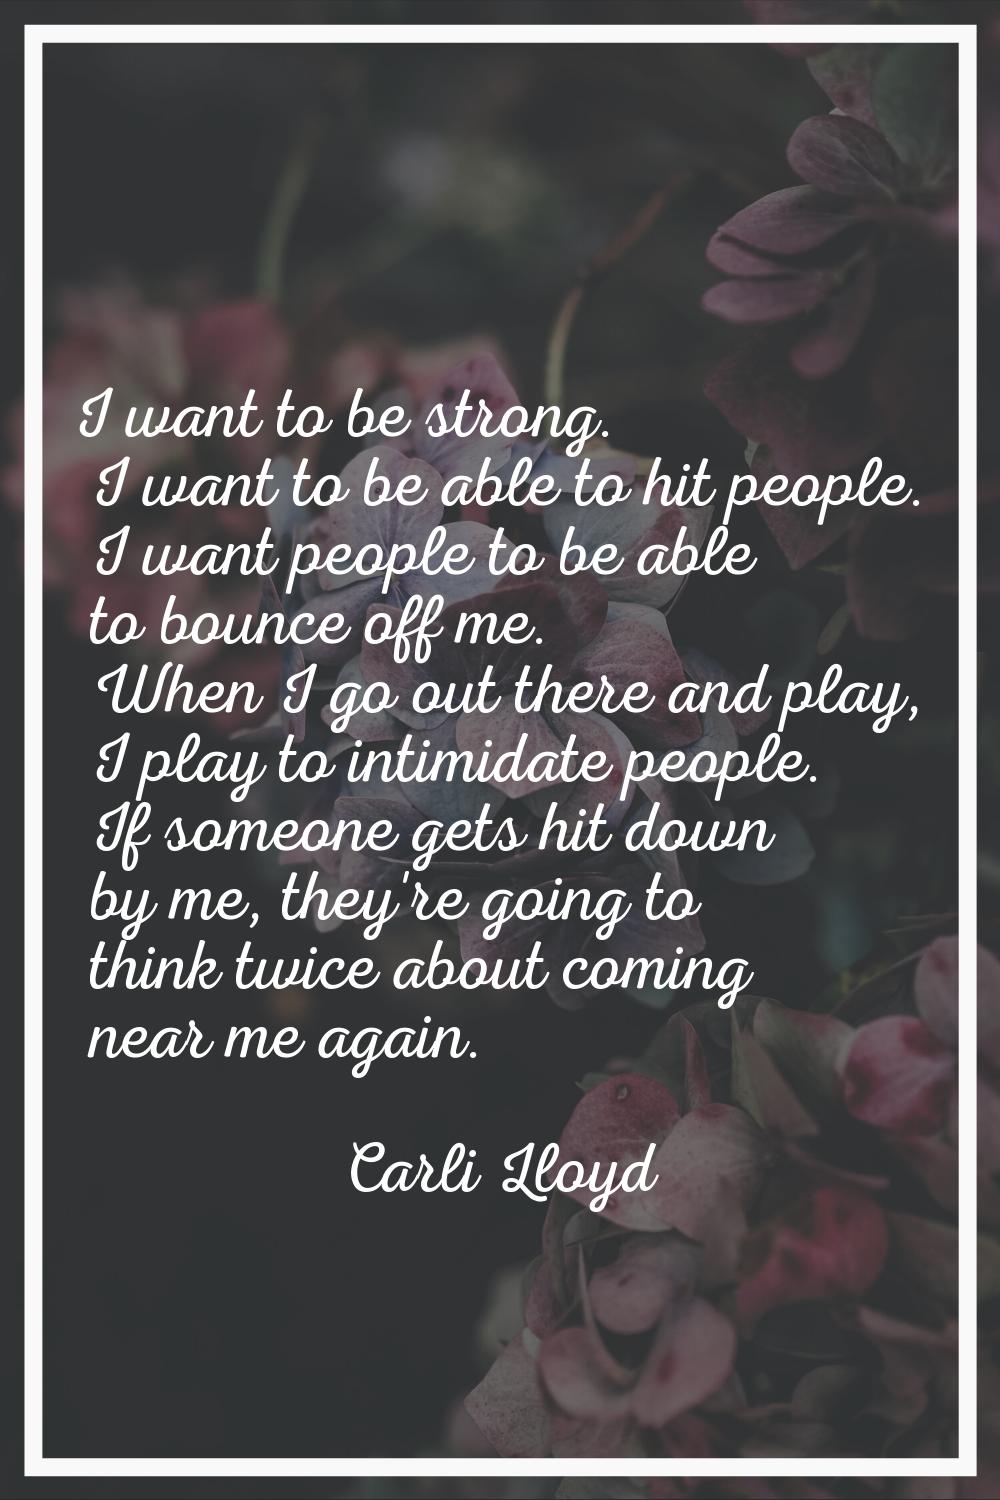 I want to be strong. I want to be able to hit people. I want people to be able to bounce off me. Wh